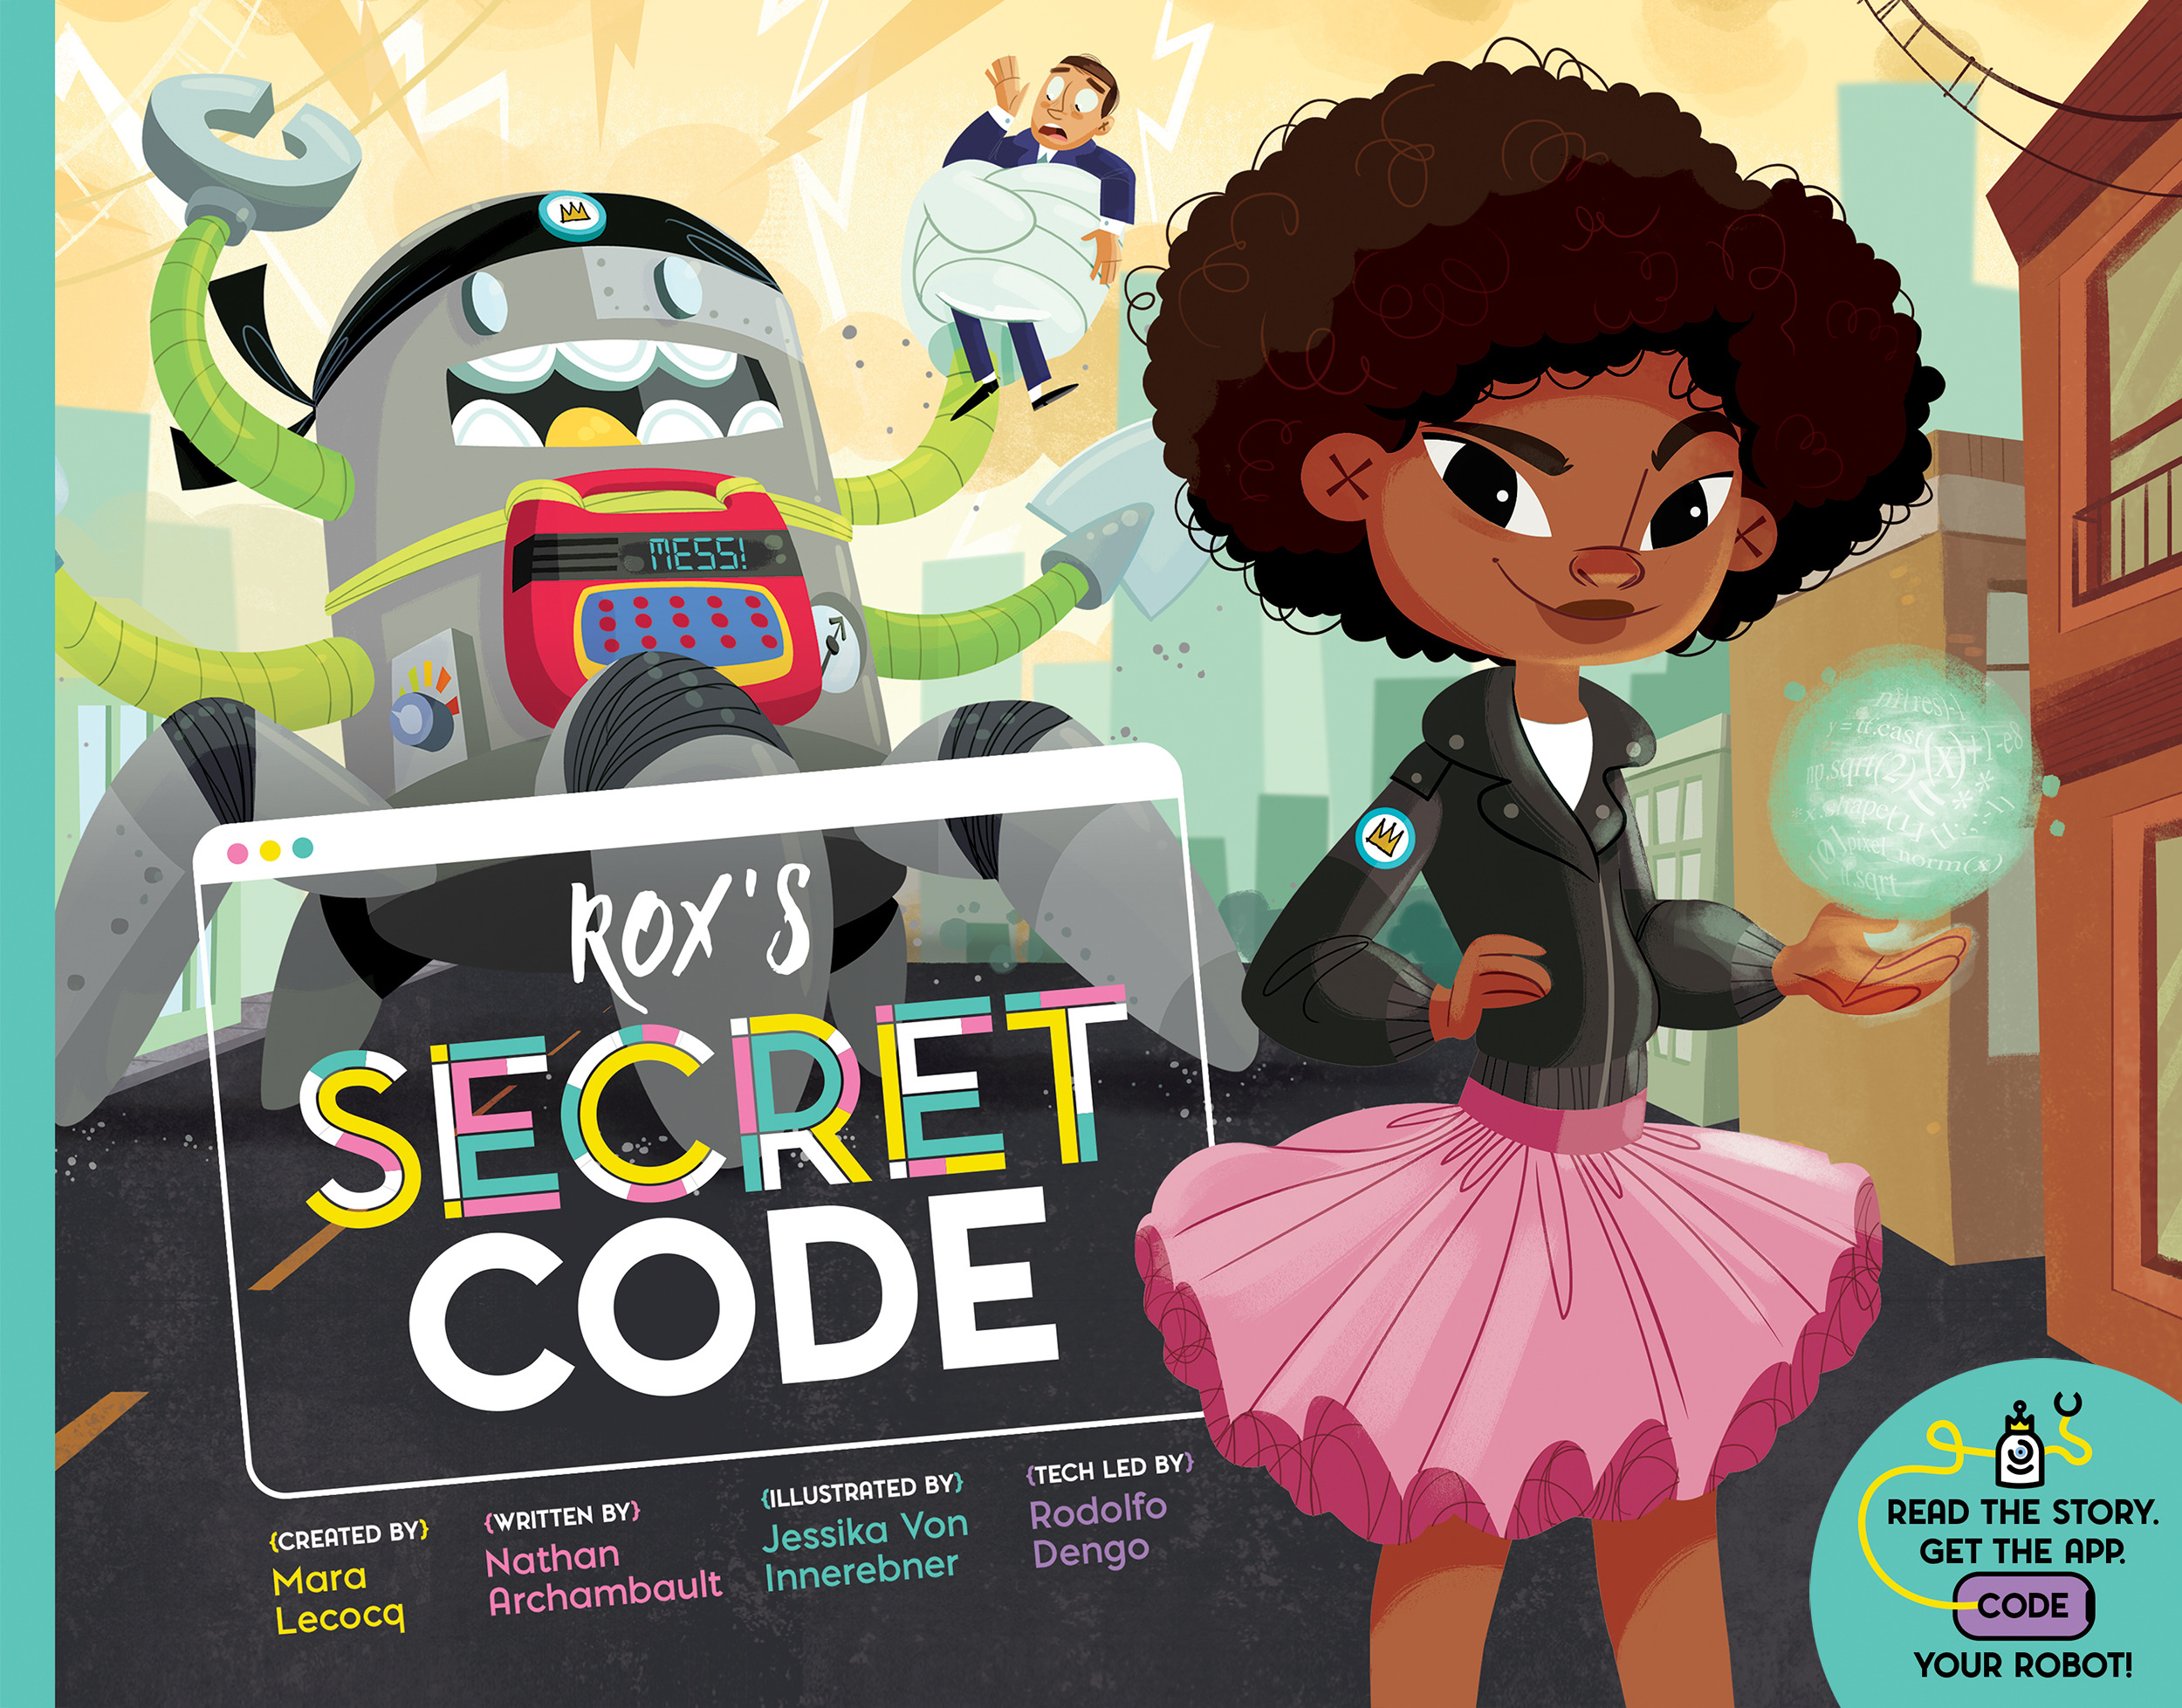 Book Launch: Rox's Secret Code by Mara Lecocq and Nathan Archambault